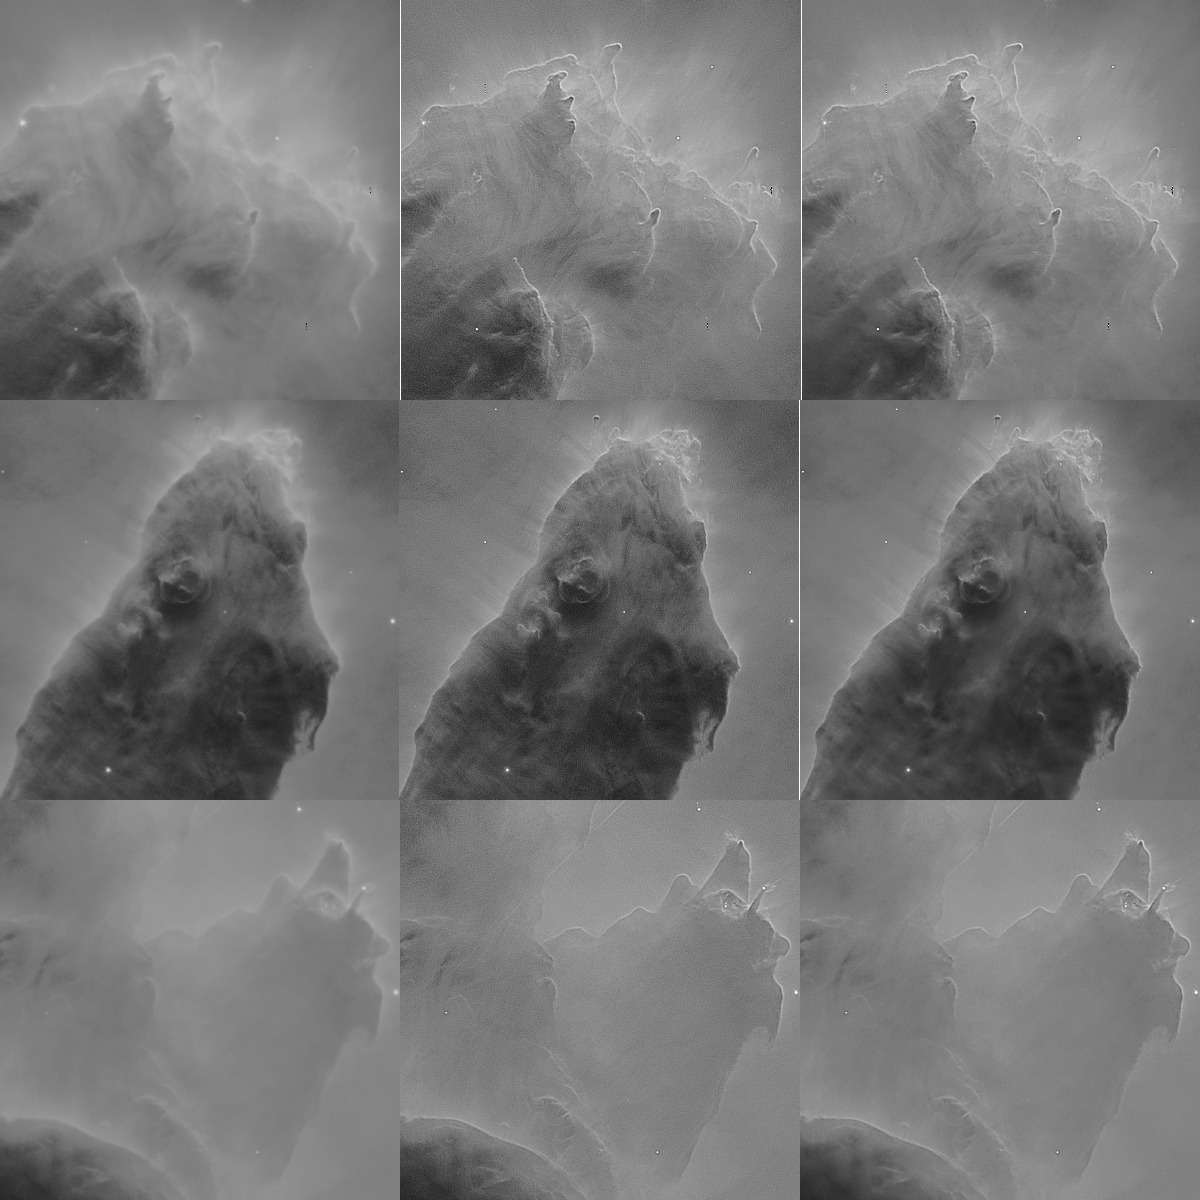 A 3x3 image demonstrating deconvolution of Hubble Space Telescope data.